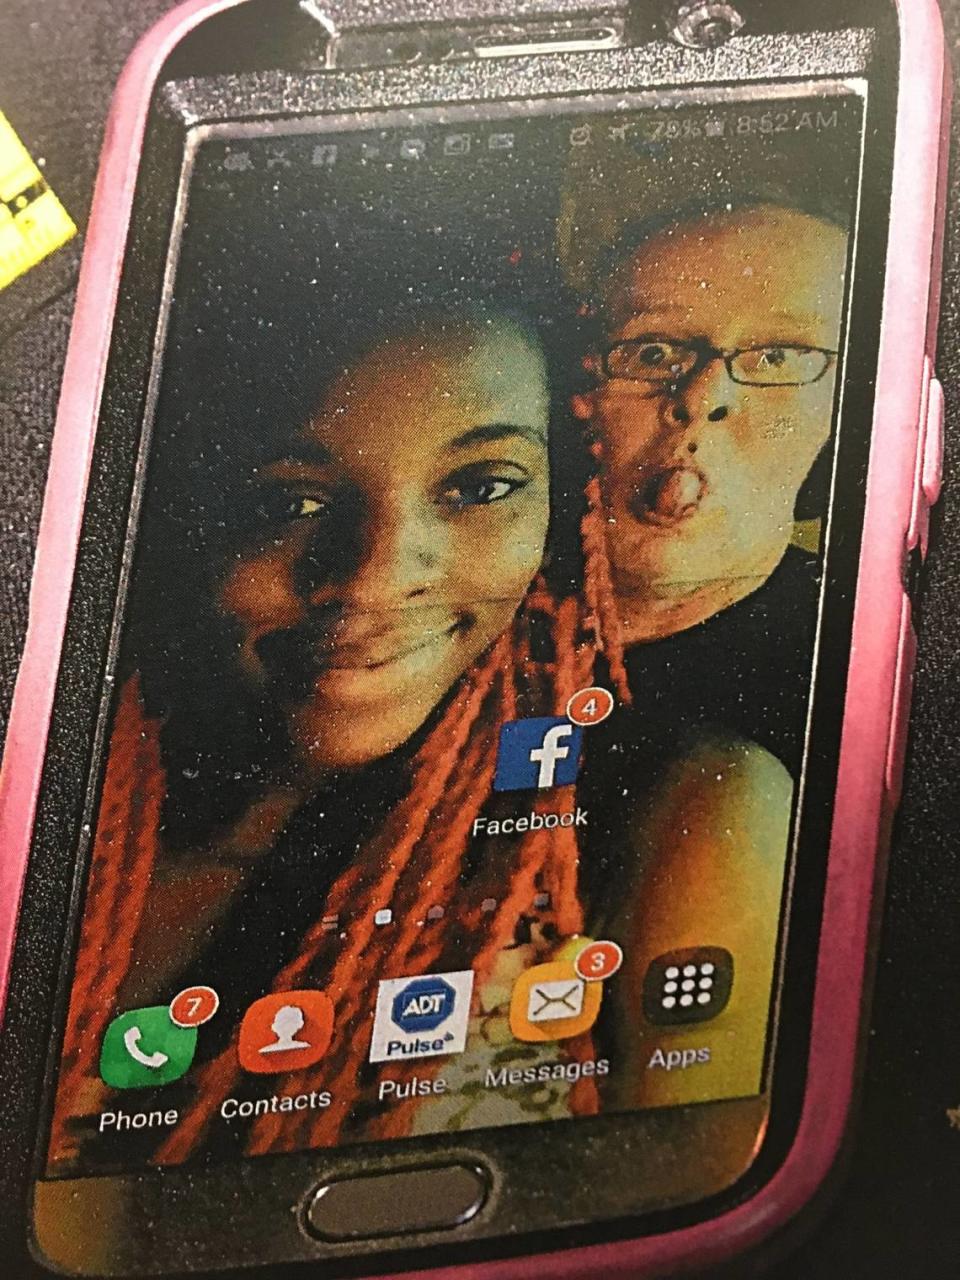 Wes Scott, a longtime Observer carrier, had this screen shot on his cell phone on the night he was shot and killed. The photo shows the 65-year-old Scott and his girlfriend Rosa Young.